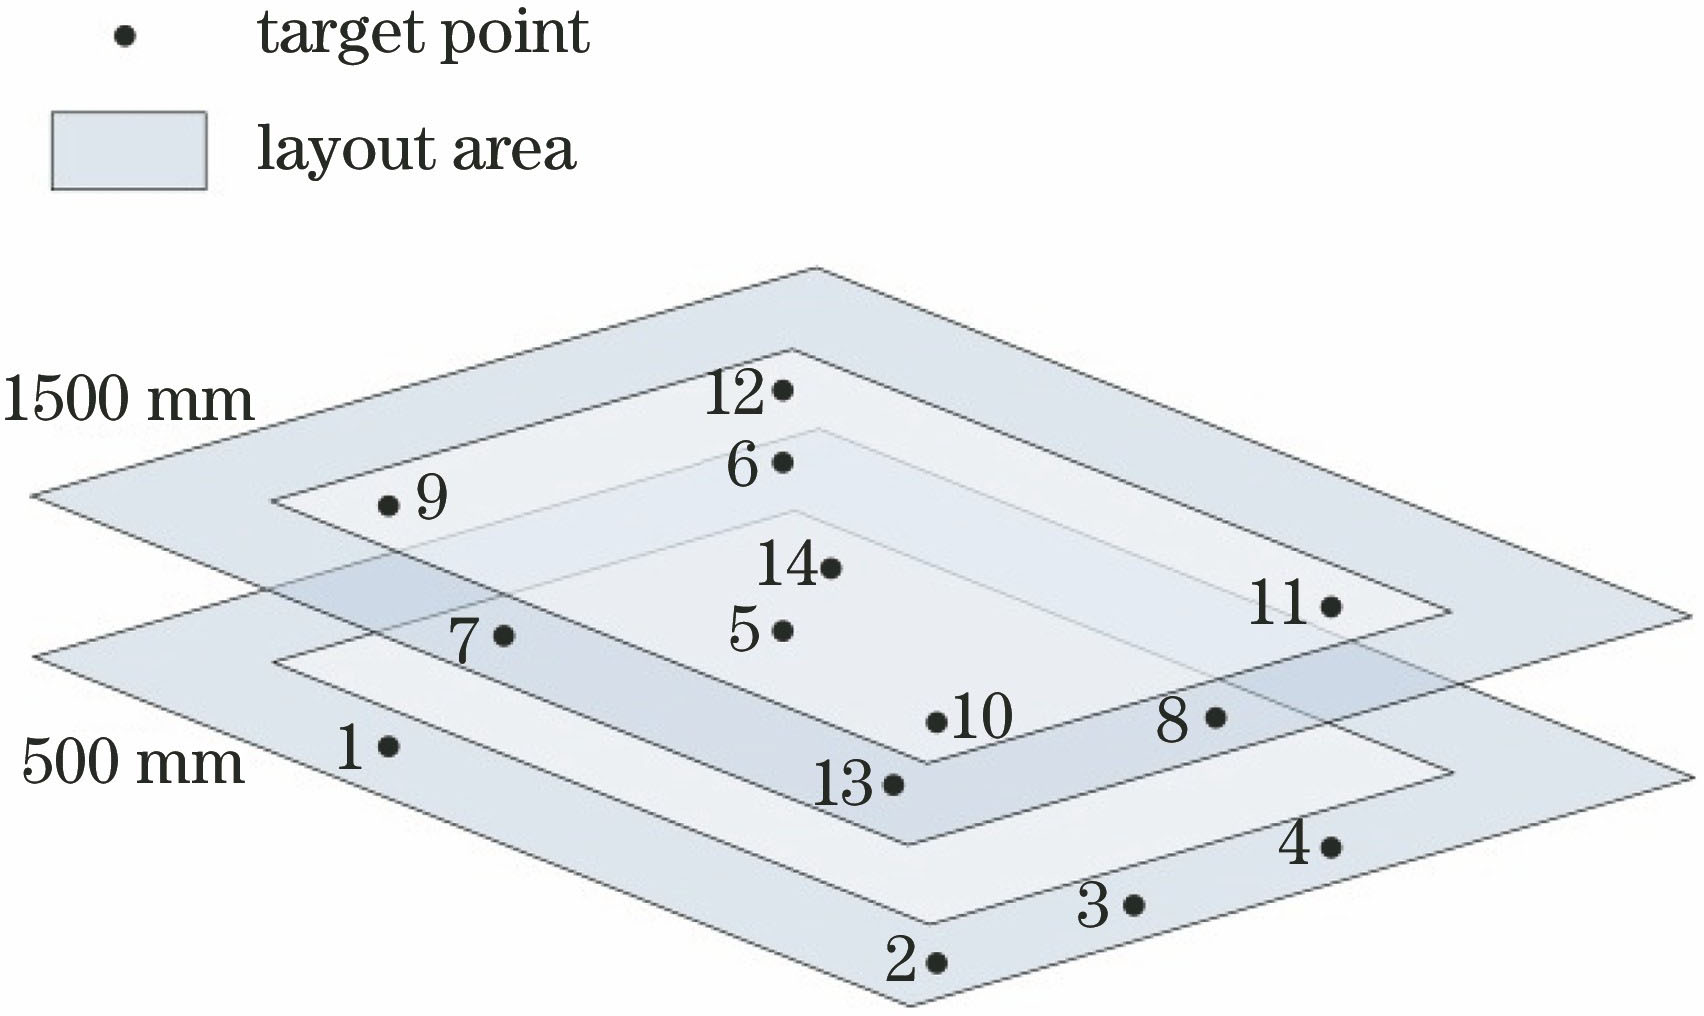 Schematic of target points and layout area